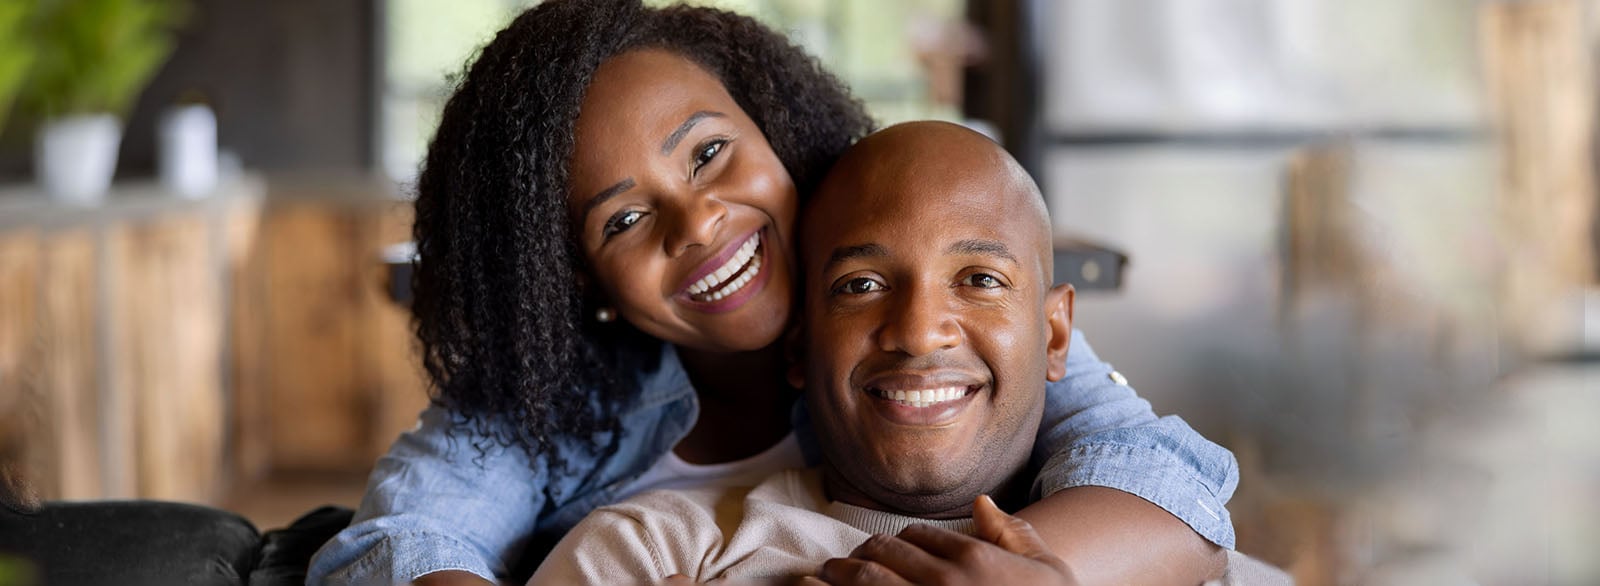 Portrait of a loving African American couple smiling at home and looking at the camera.